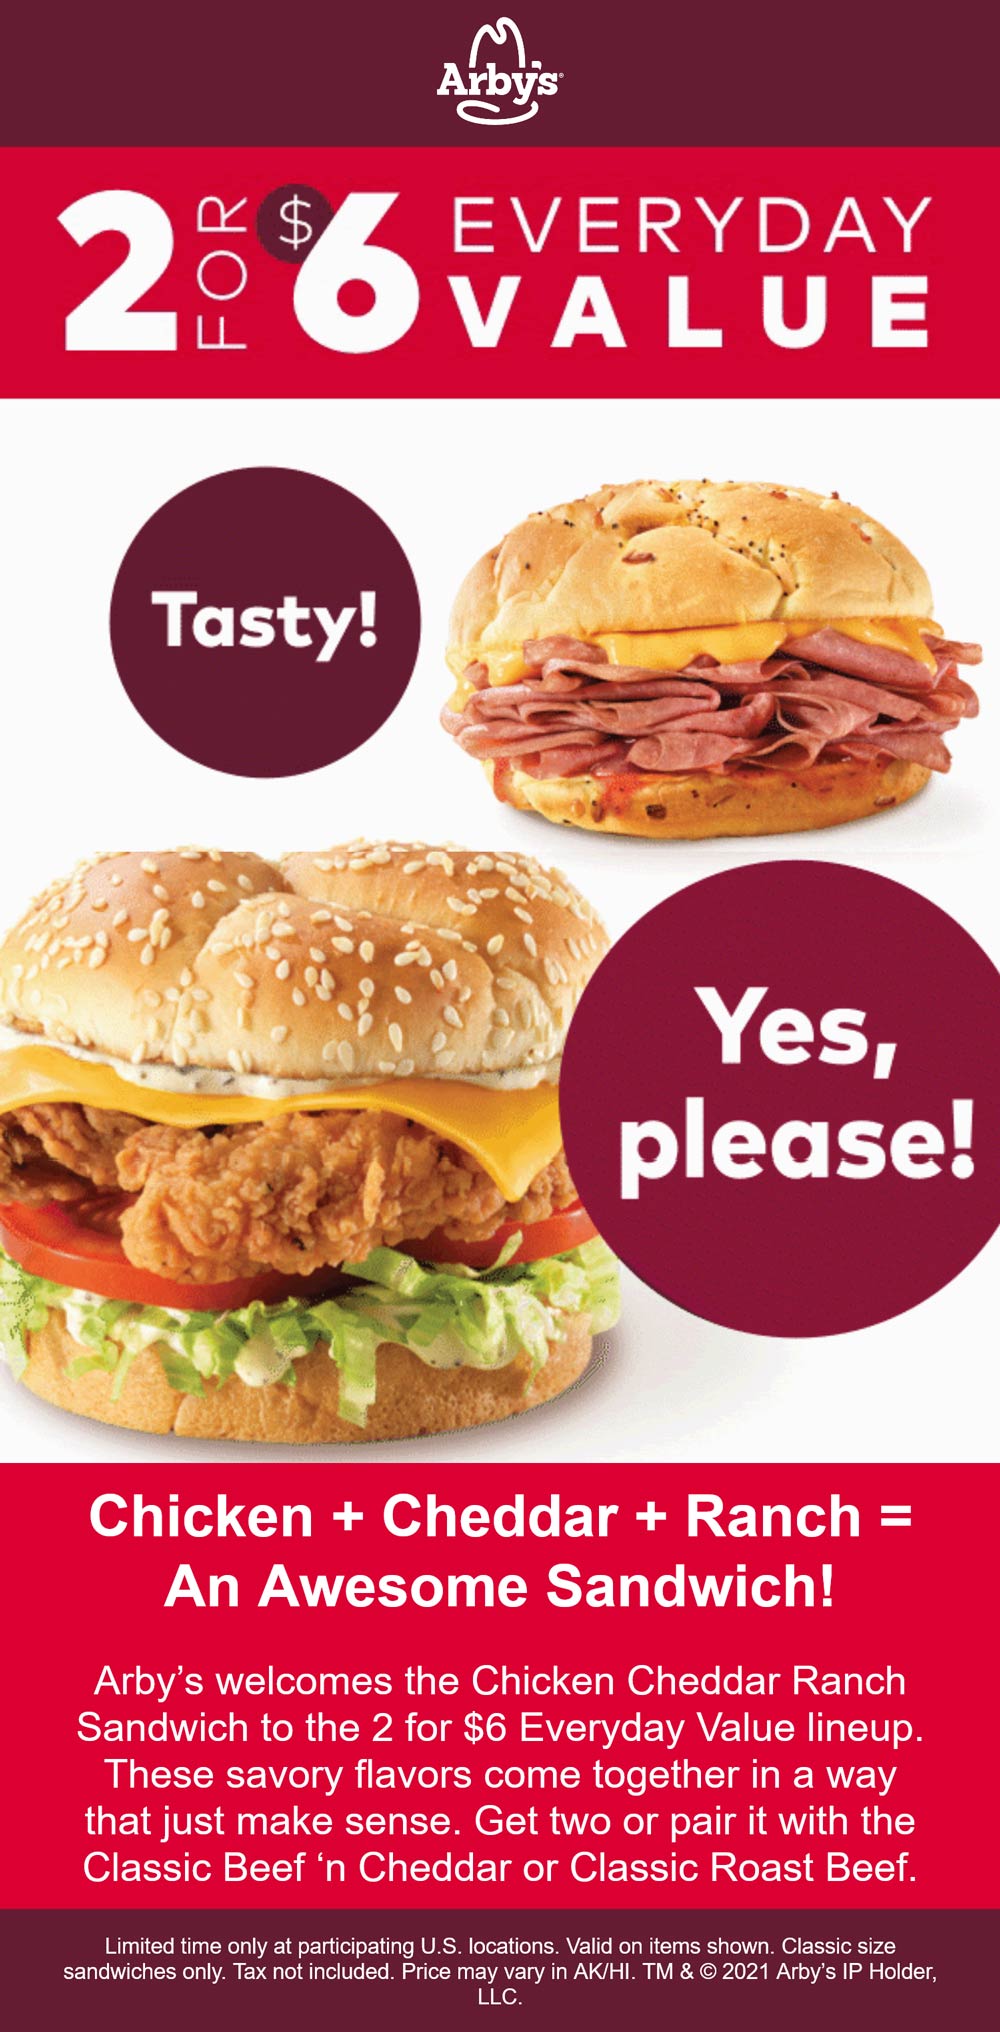 Arbys restaurants Coupon  2 for $6 on cheddar chicken or beef sandwiches at Arbys #arbys 